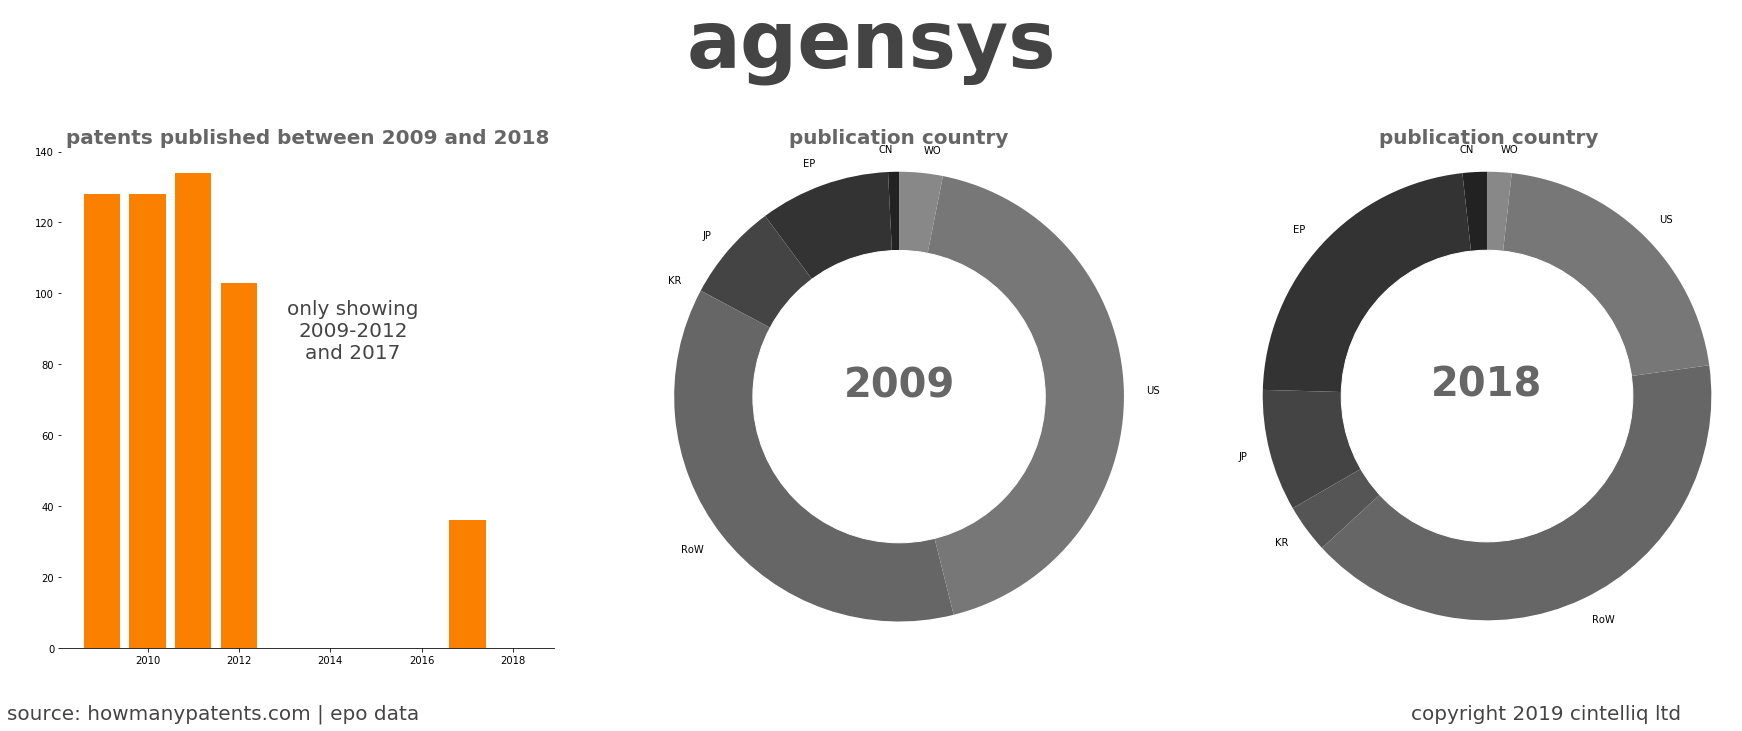 summary of patents for Agensys